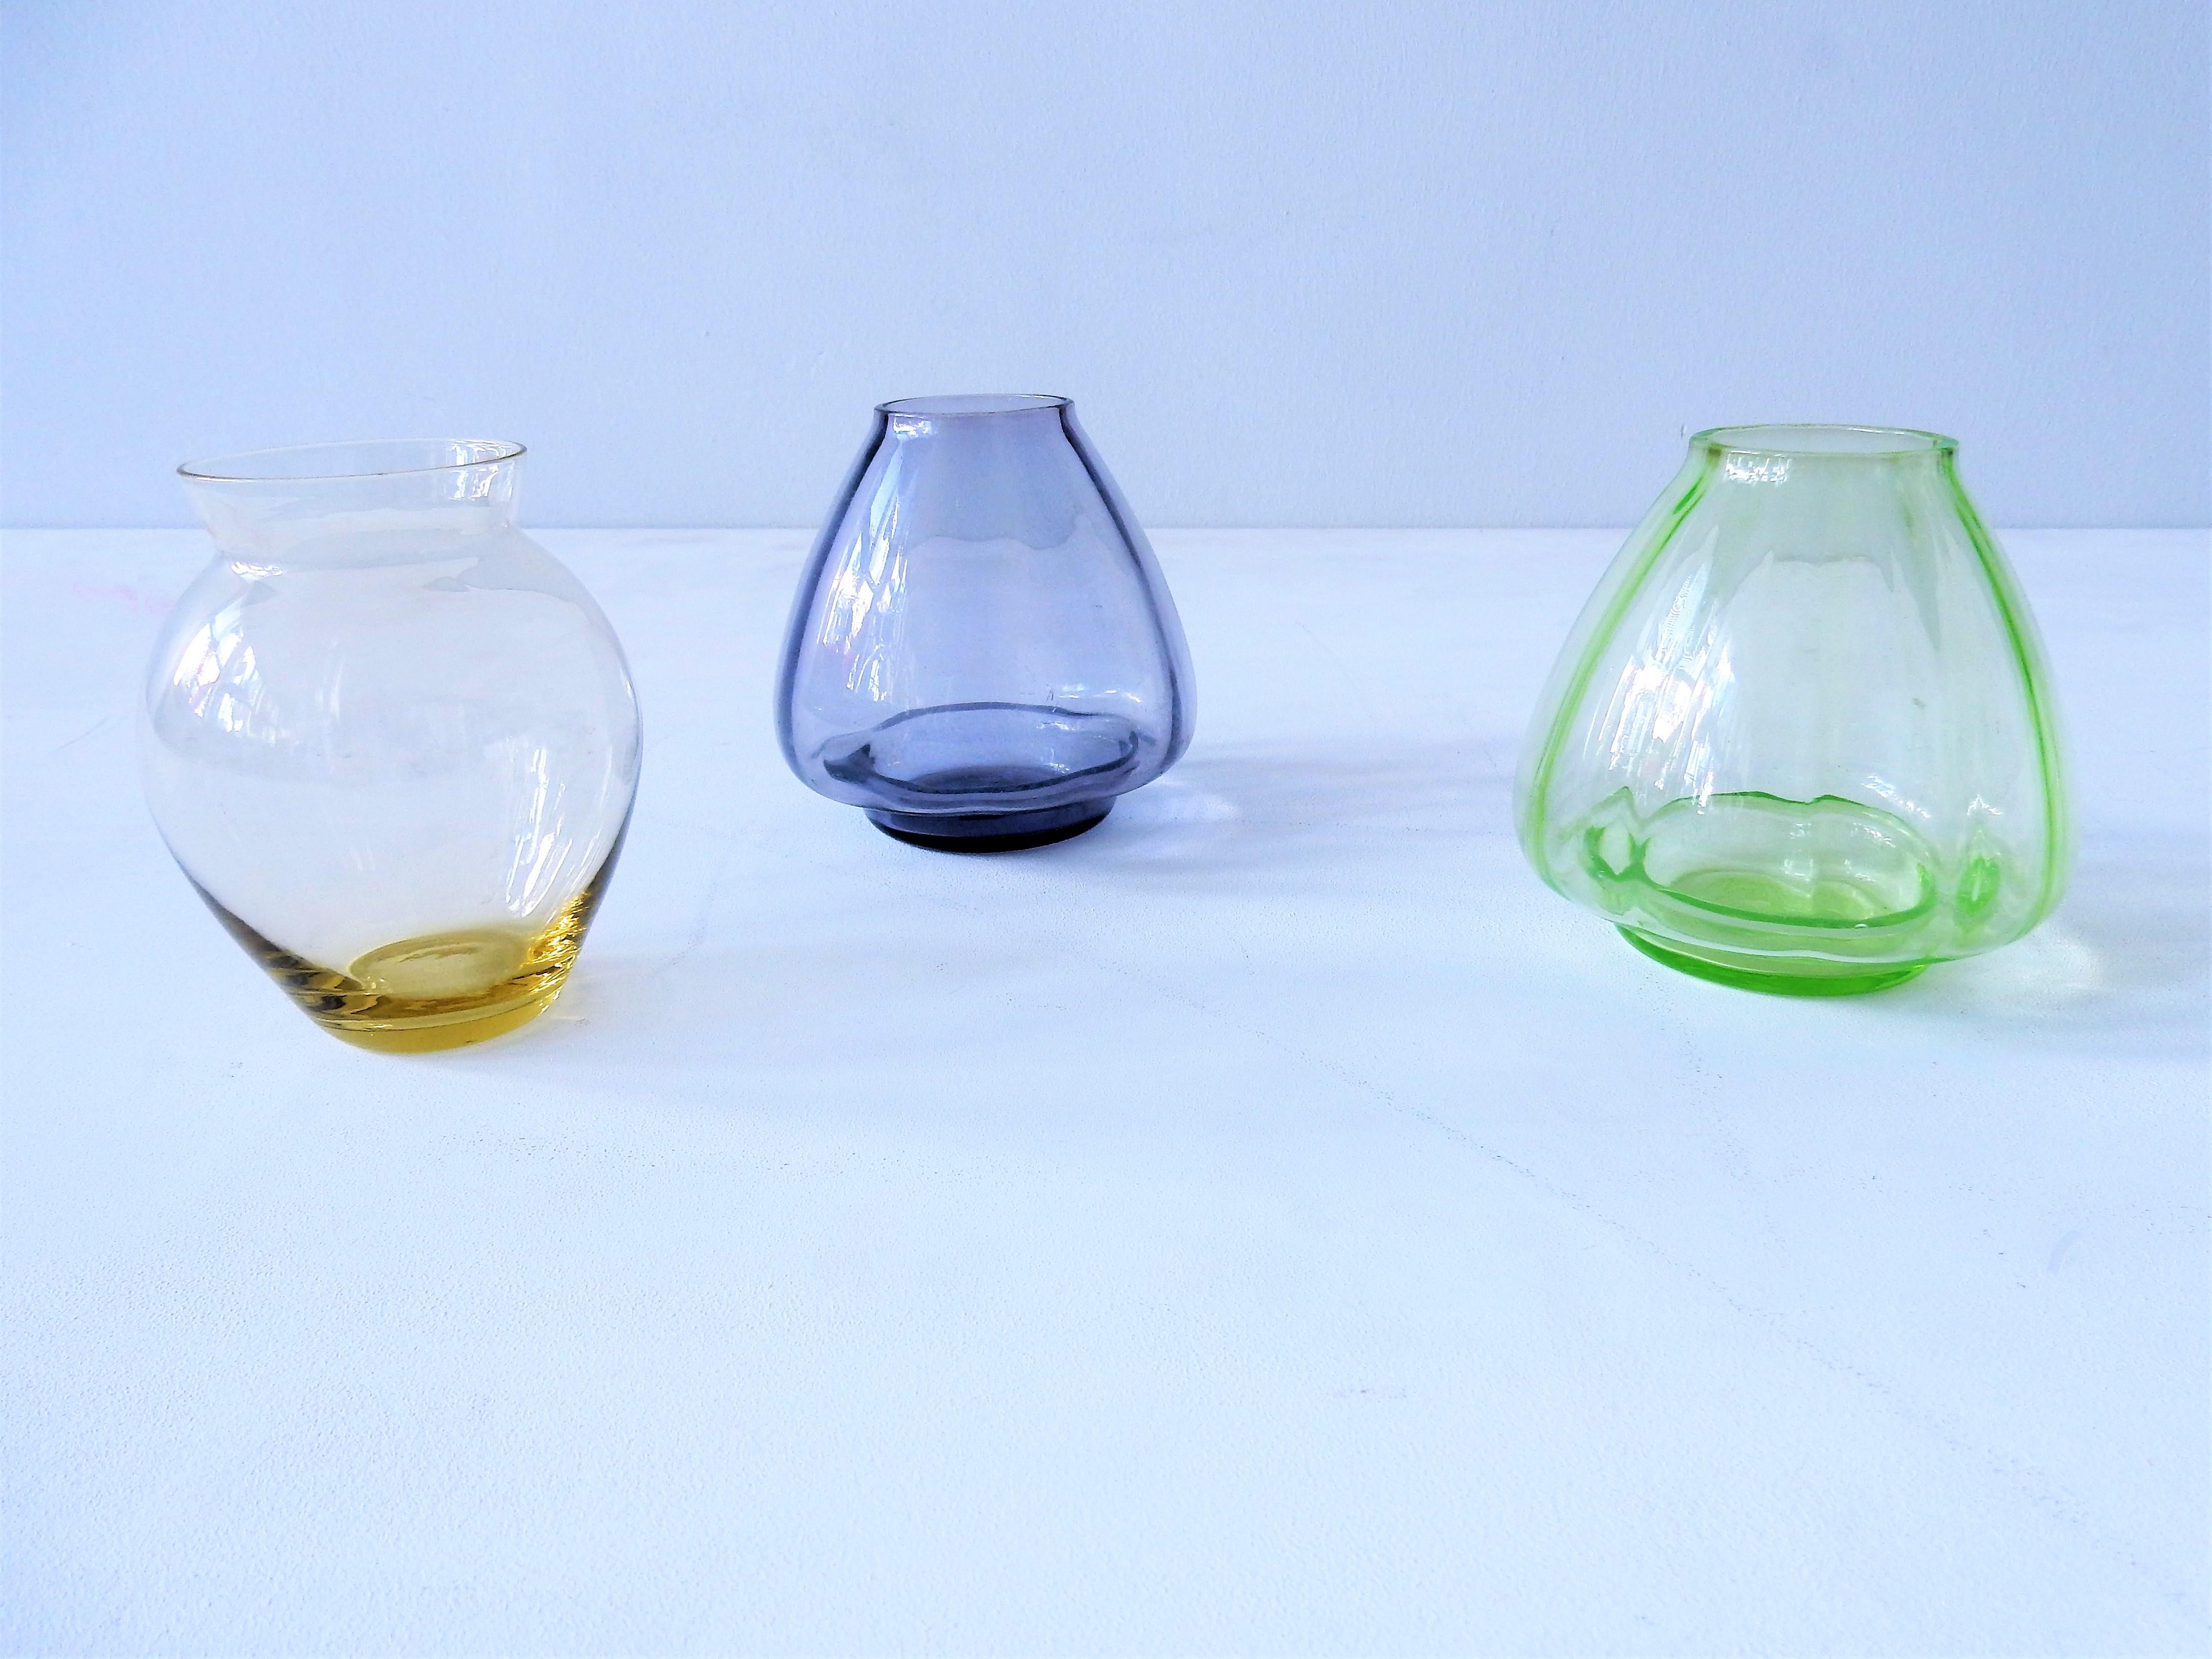 Dutch Set of Three Small Colored Glass Vases by A.D. Copier, the Netherlands, 1930s For Sale